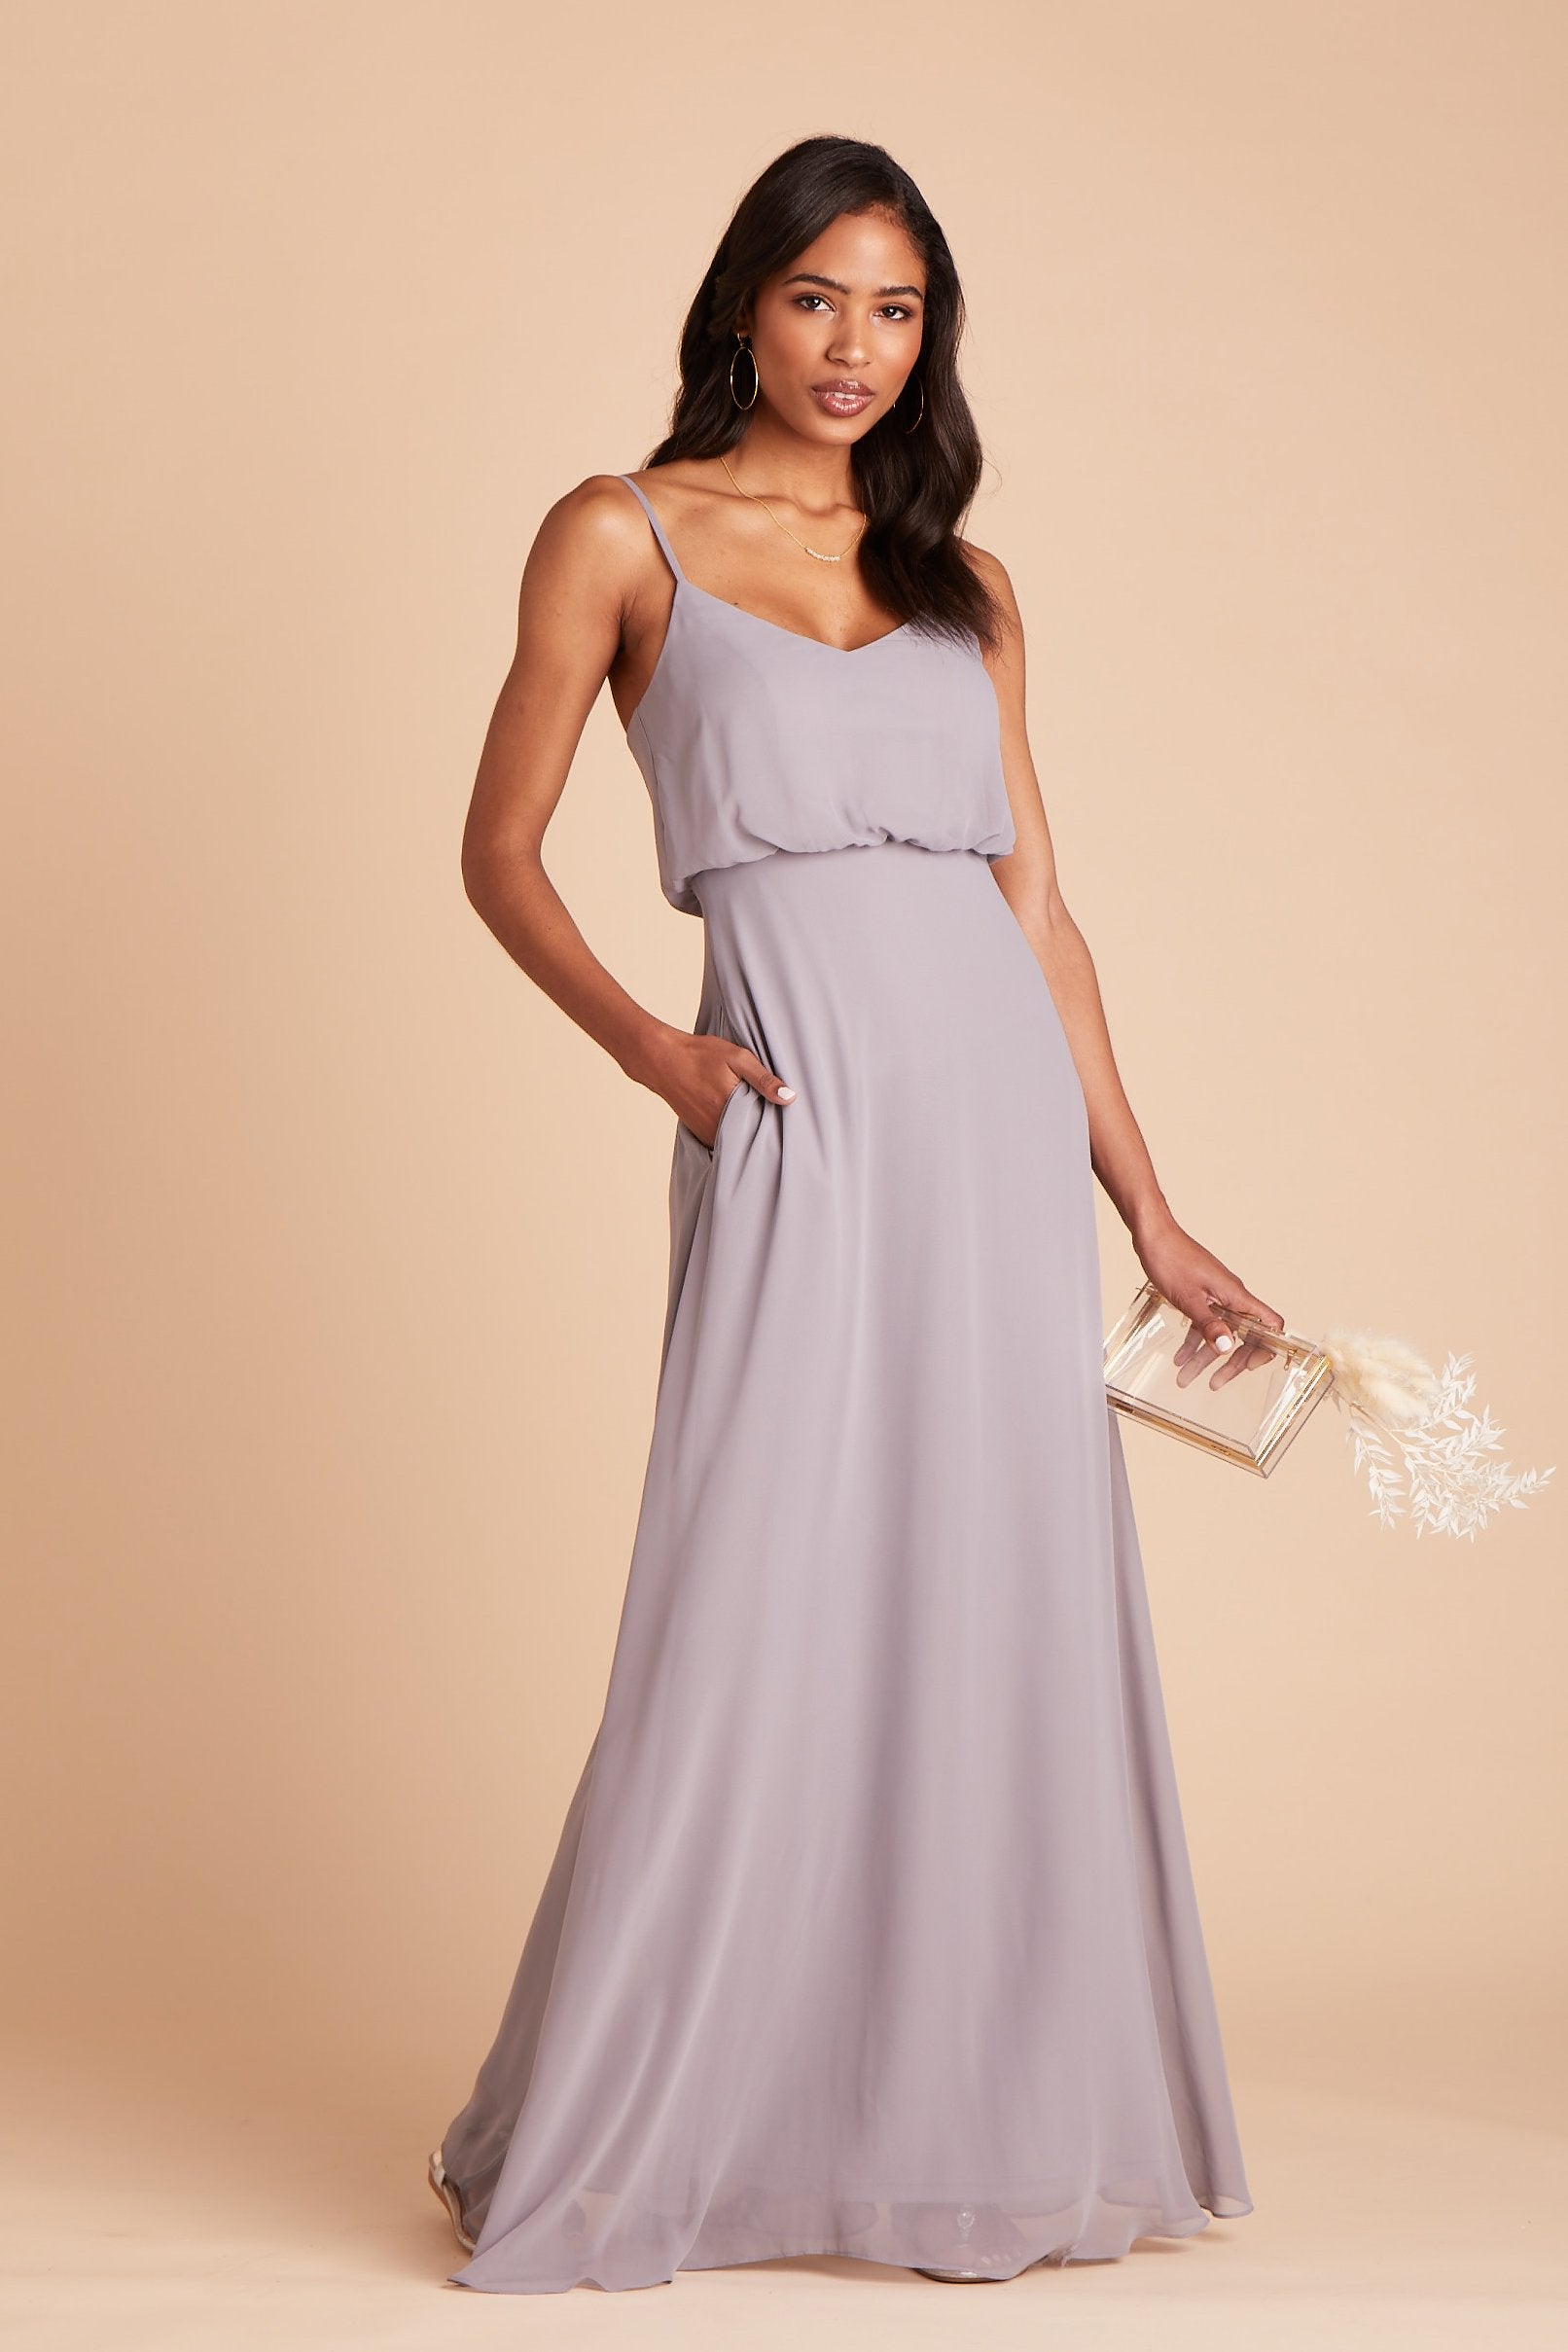 Gwennie bridesmaid dress in silver chiffon by Birdy Grey, front view with hand in pocket